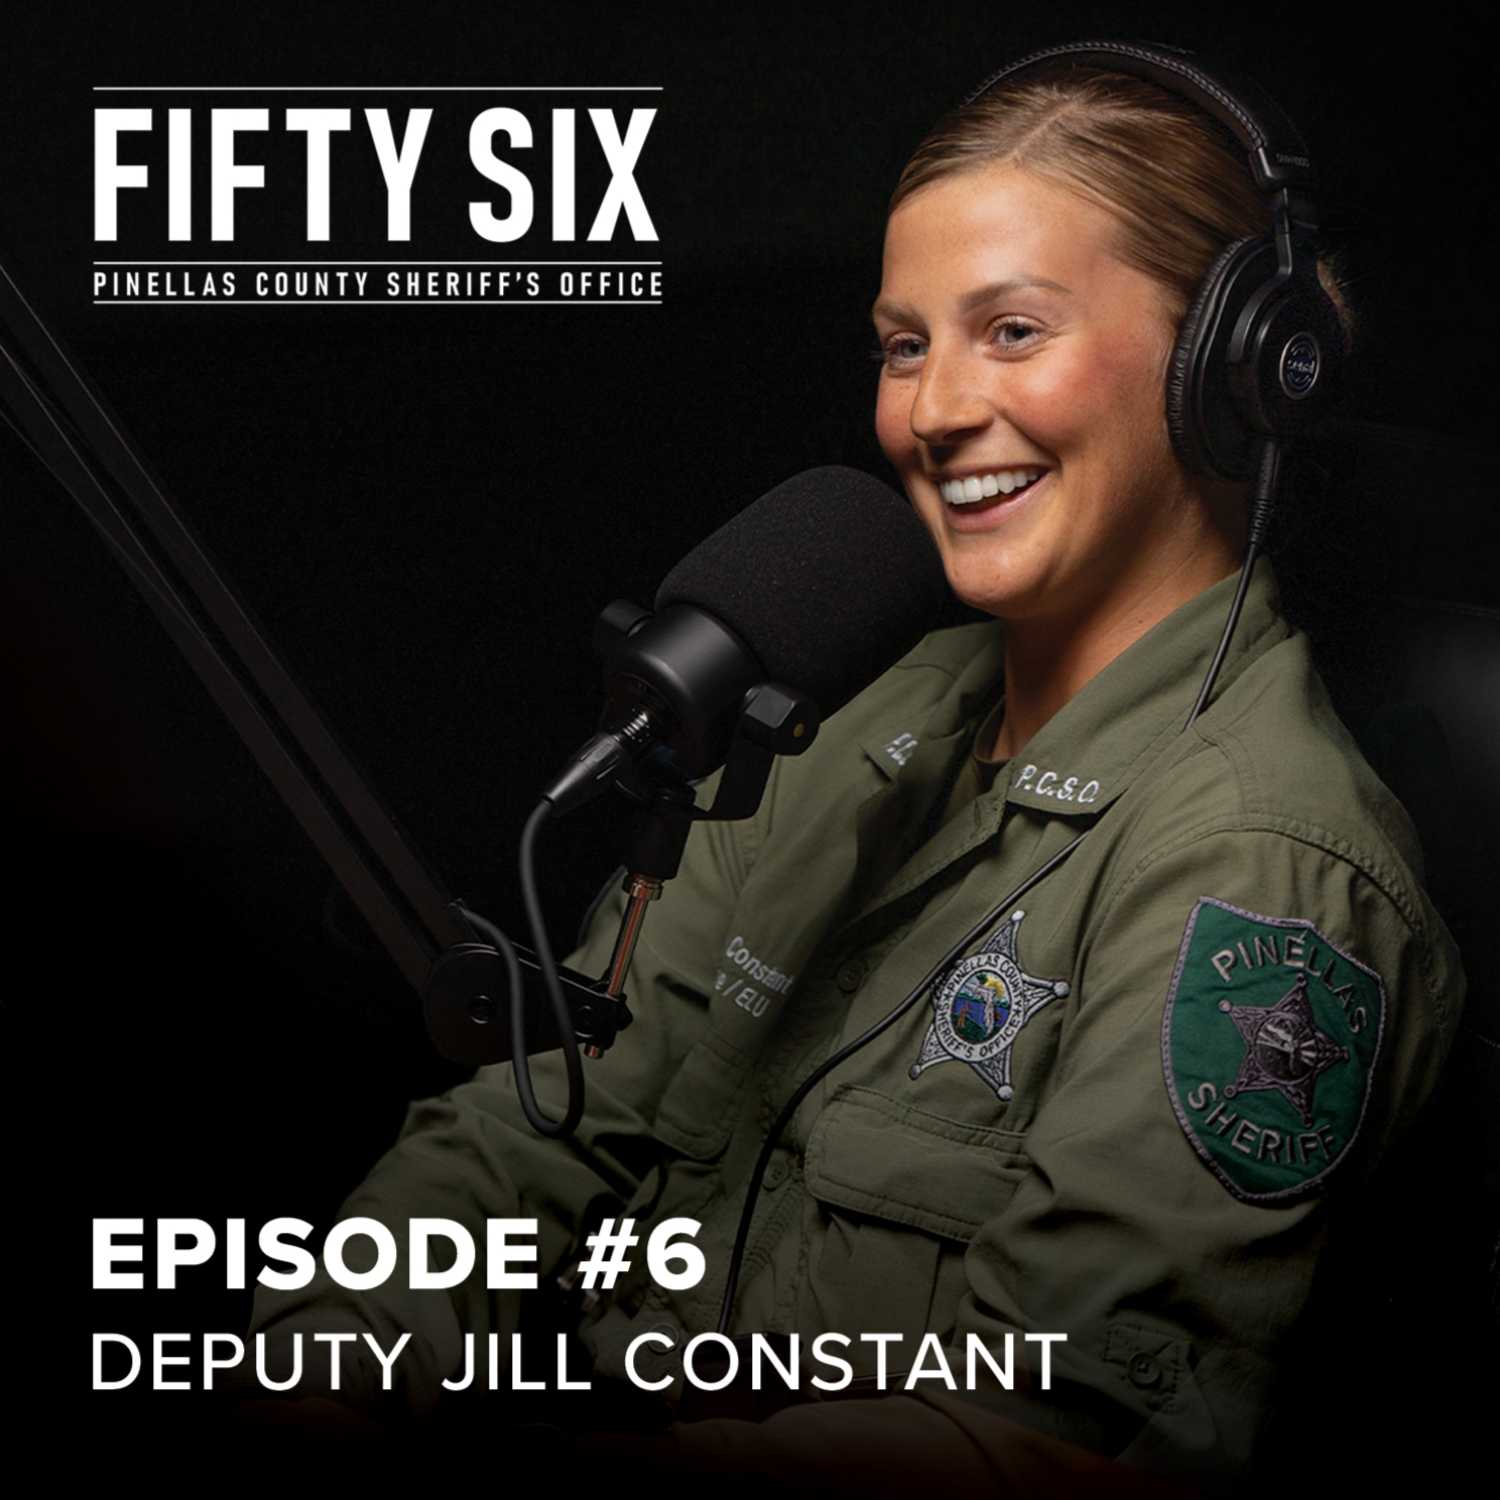 #6 "Insides Should Not Be on the Outside" - Deputy Jill Constant